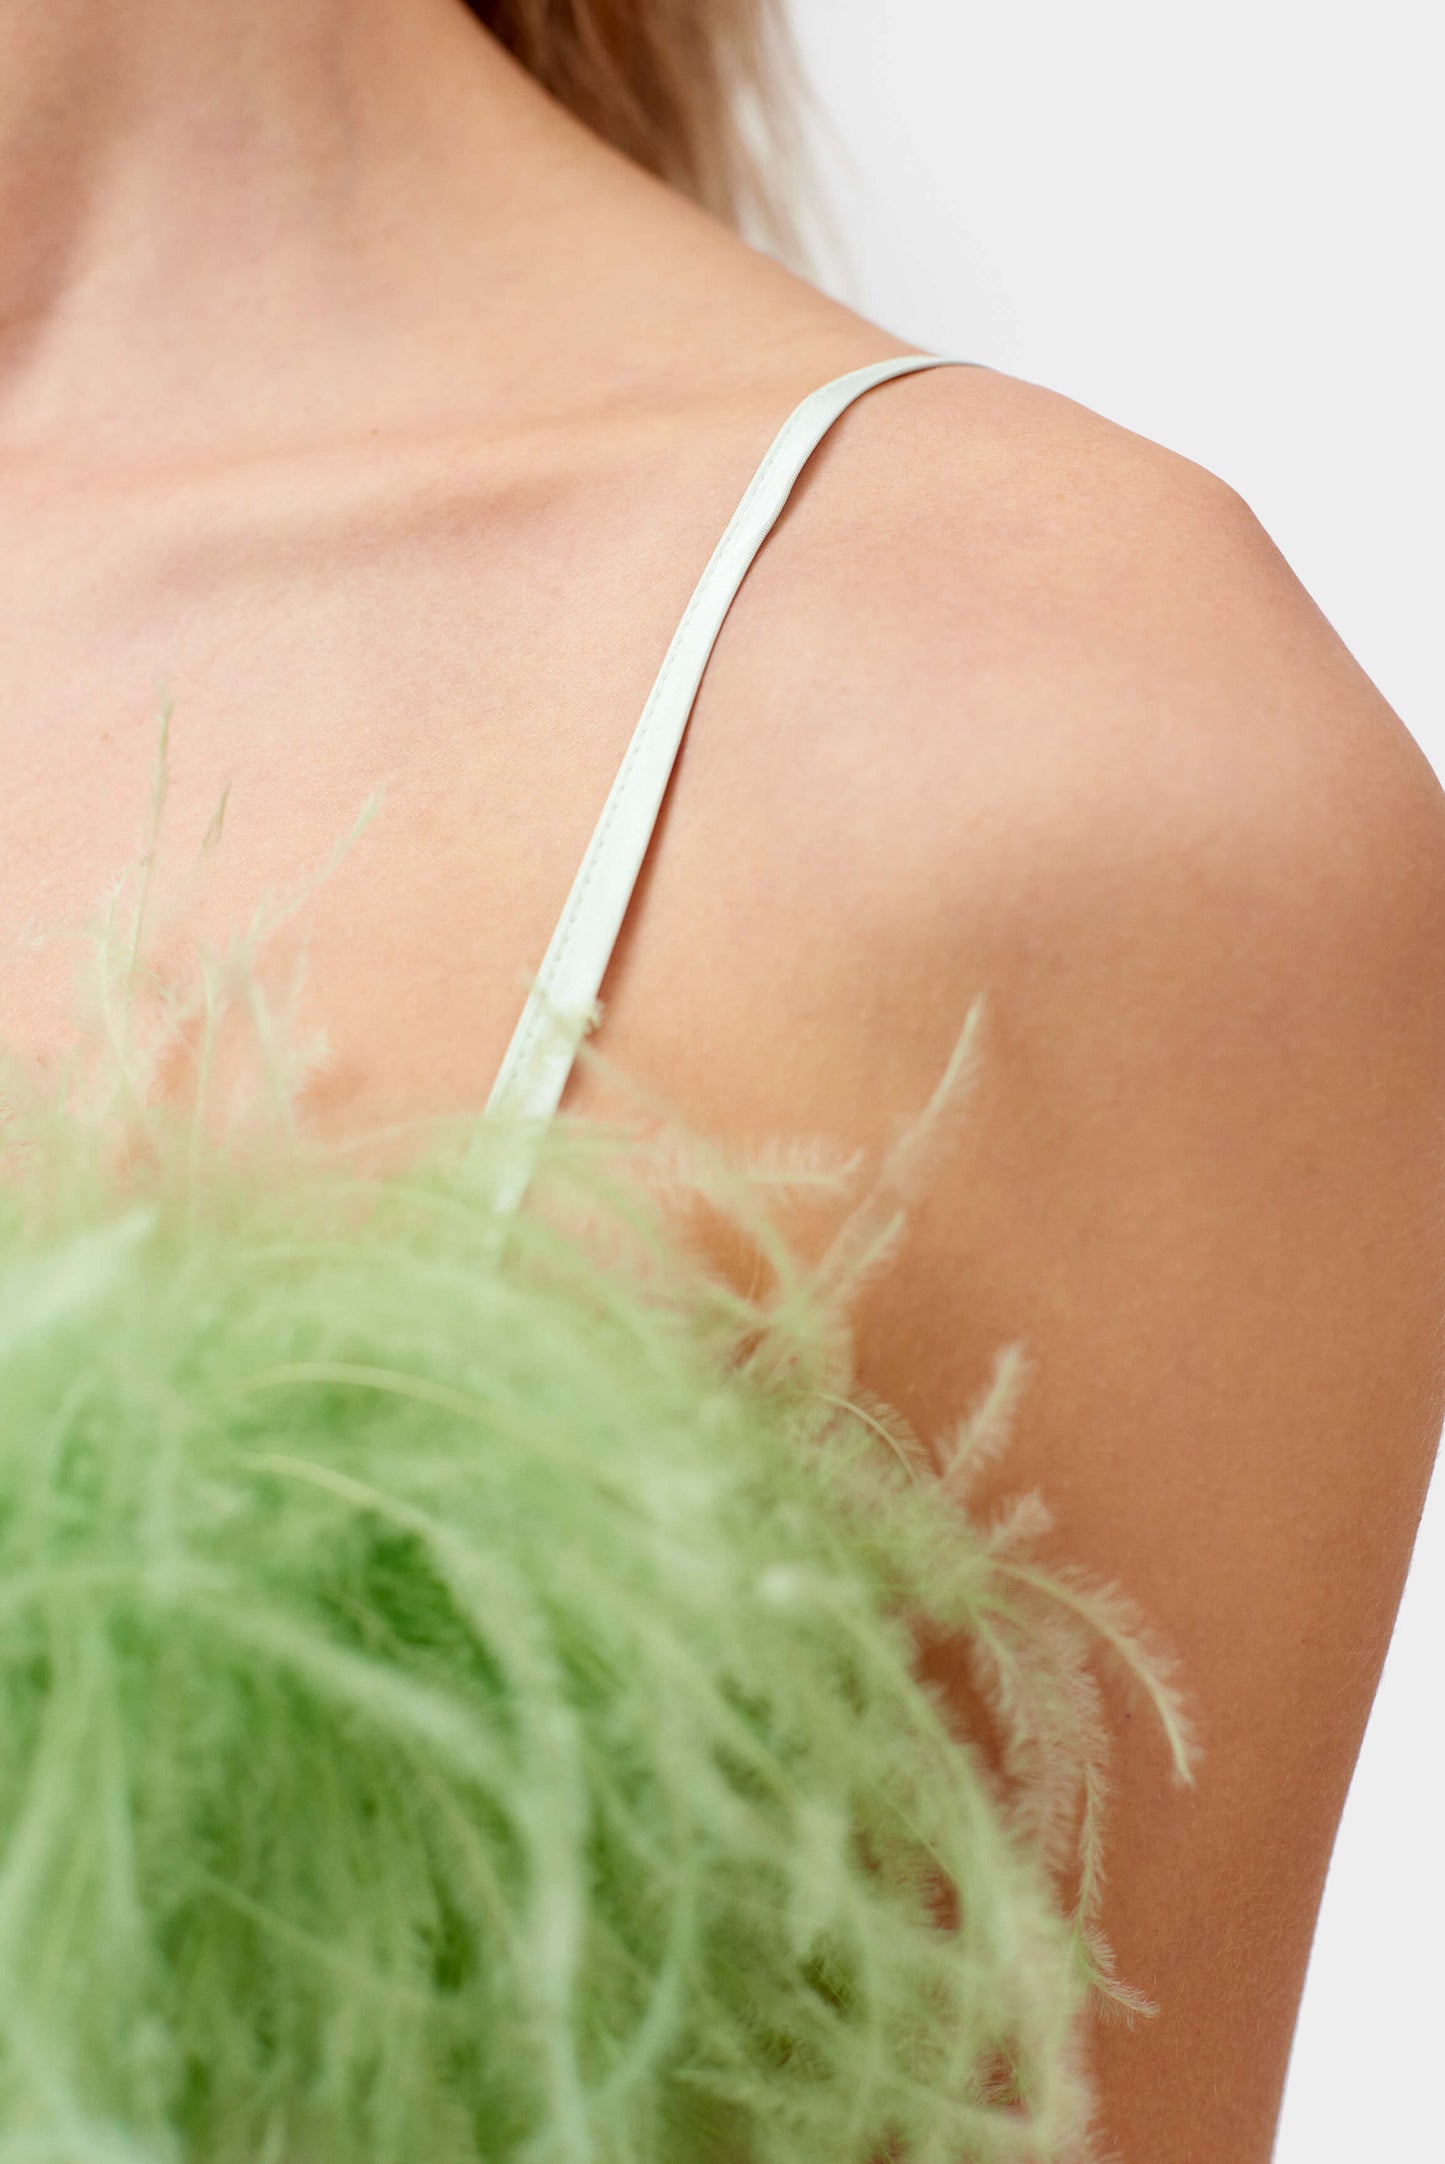 Boheme Slip Dress with Feathers in Mint